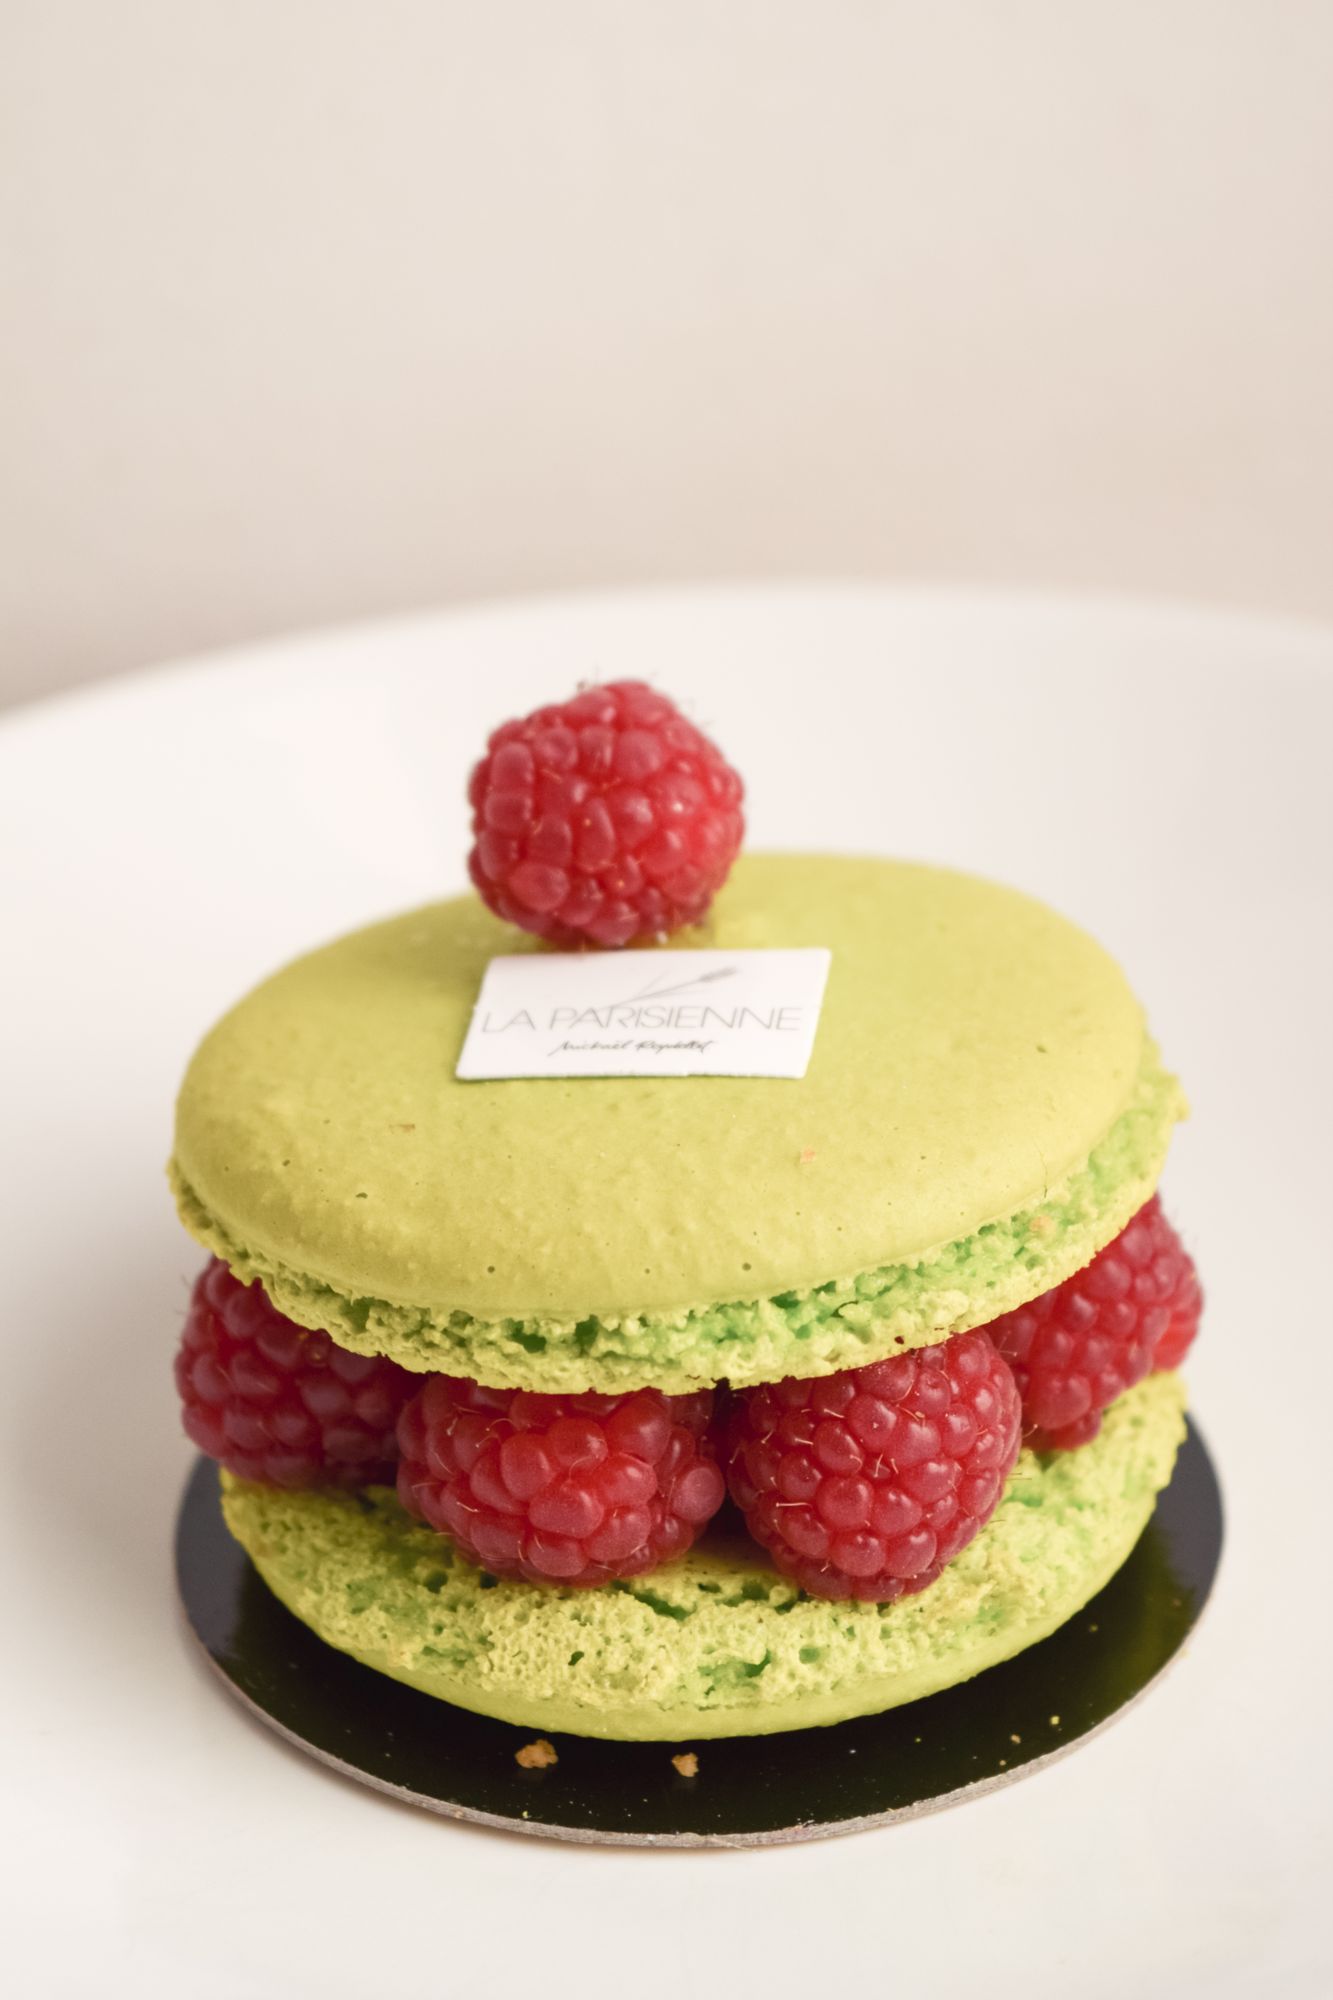 Macaronade – French Pastries to Try in Paris